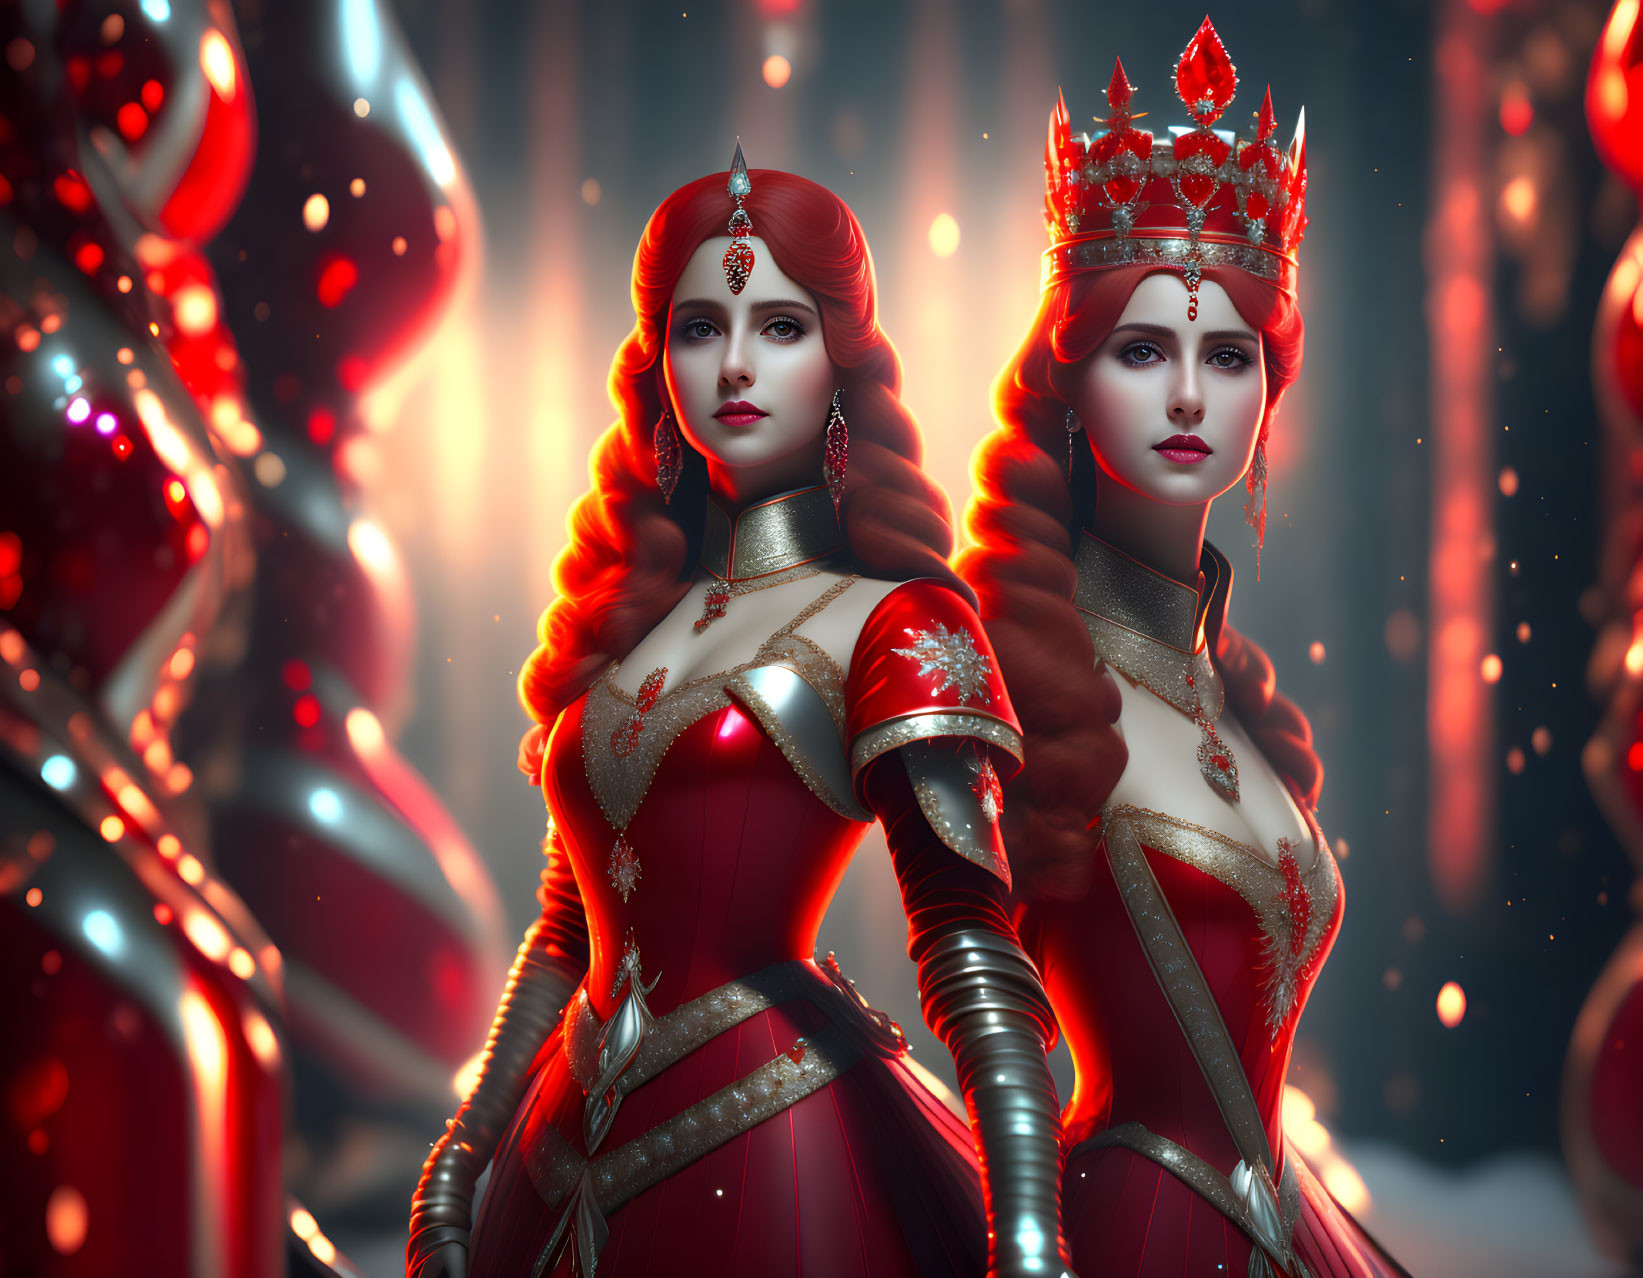 Regal women in red and gold dresses with crowns against fiery backdrop